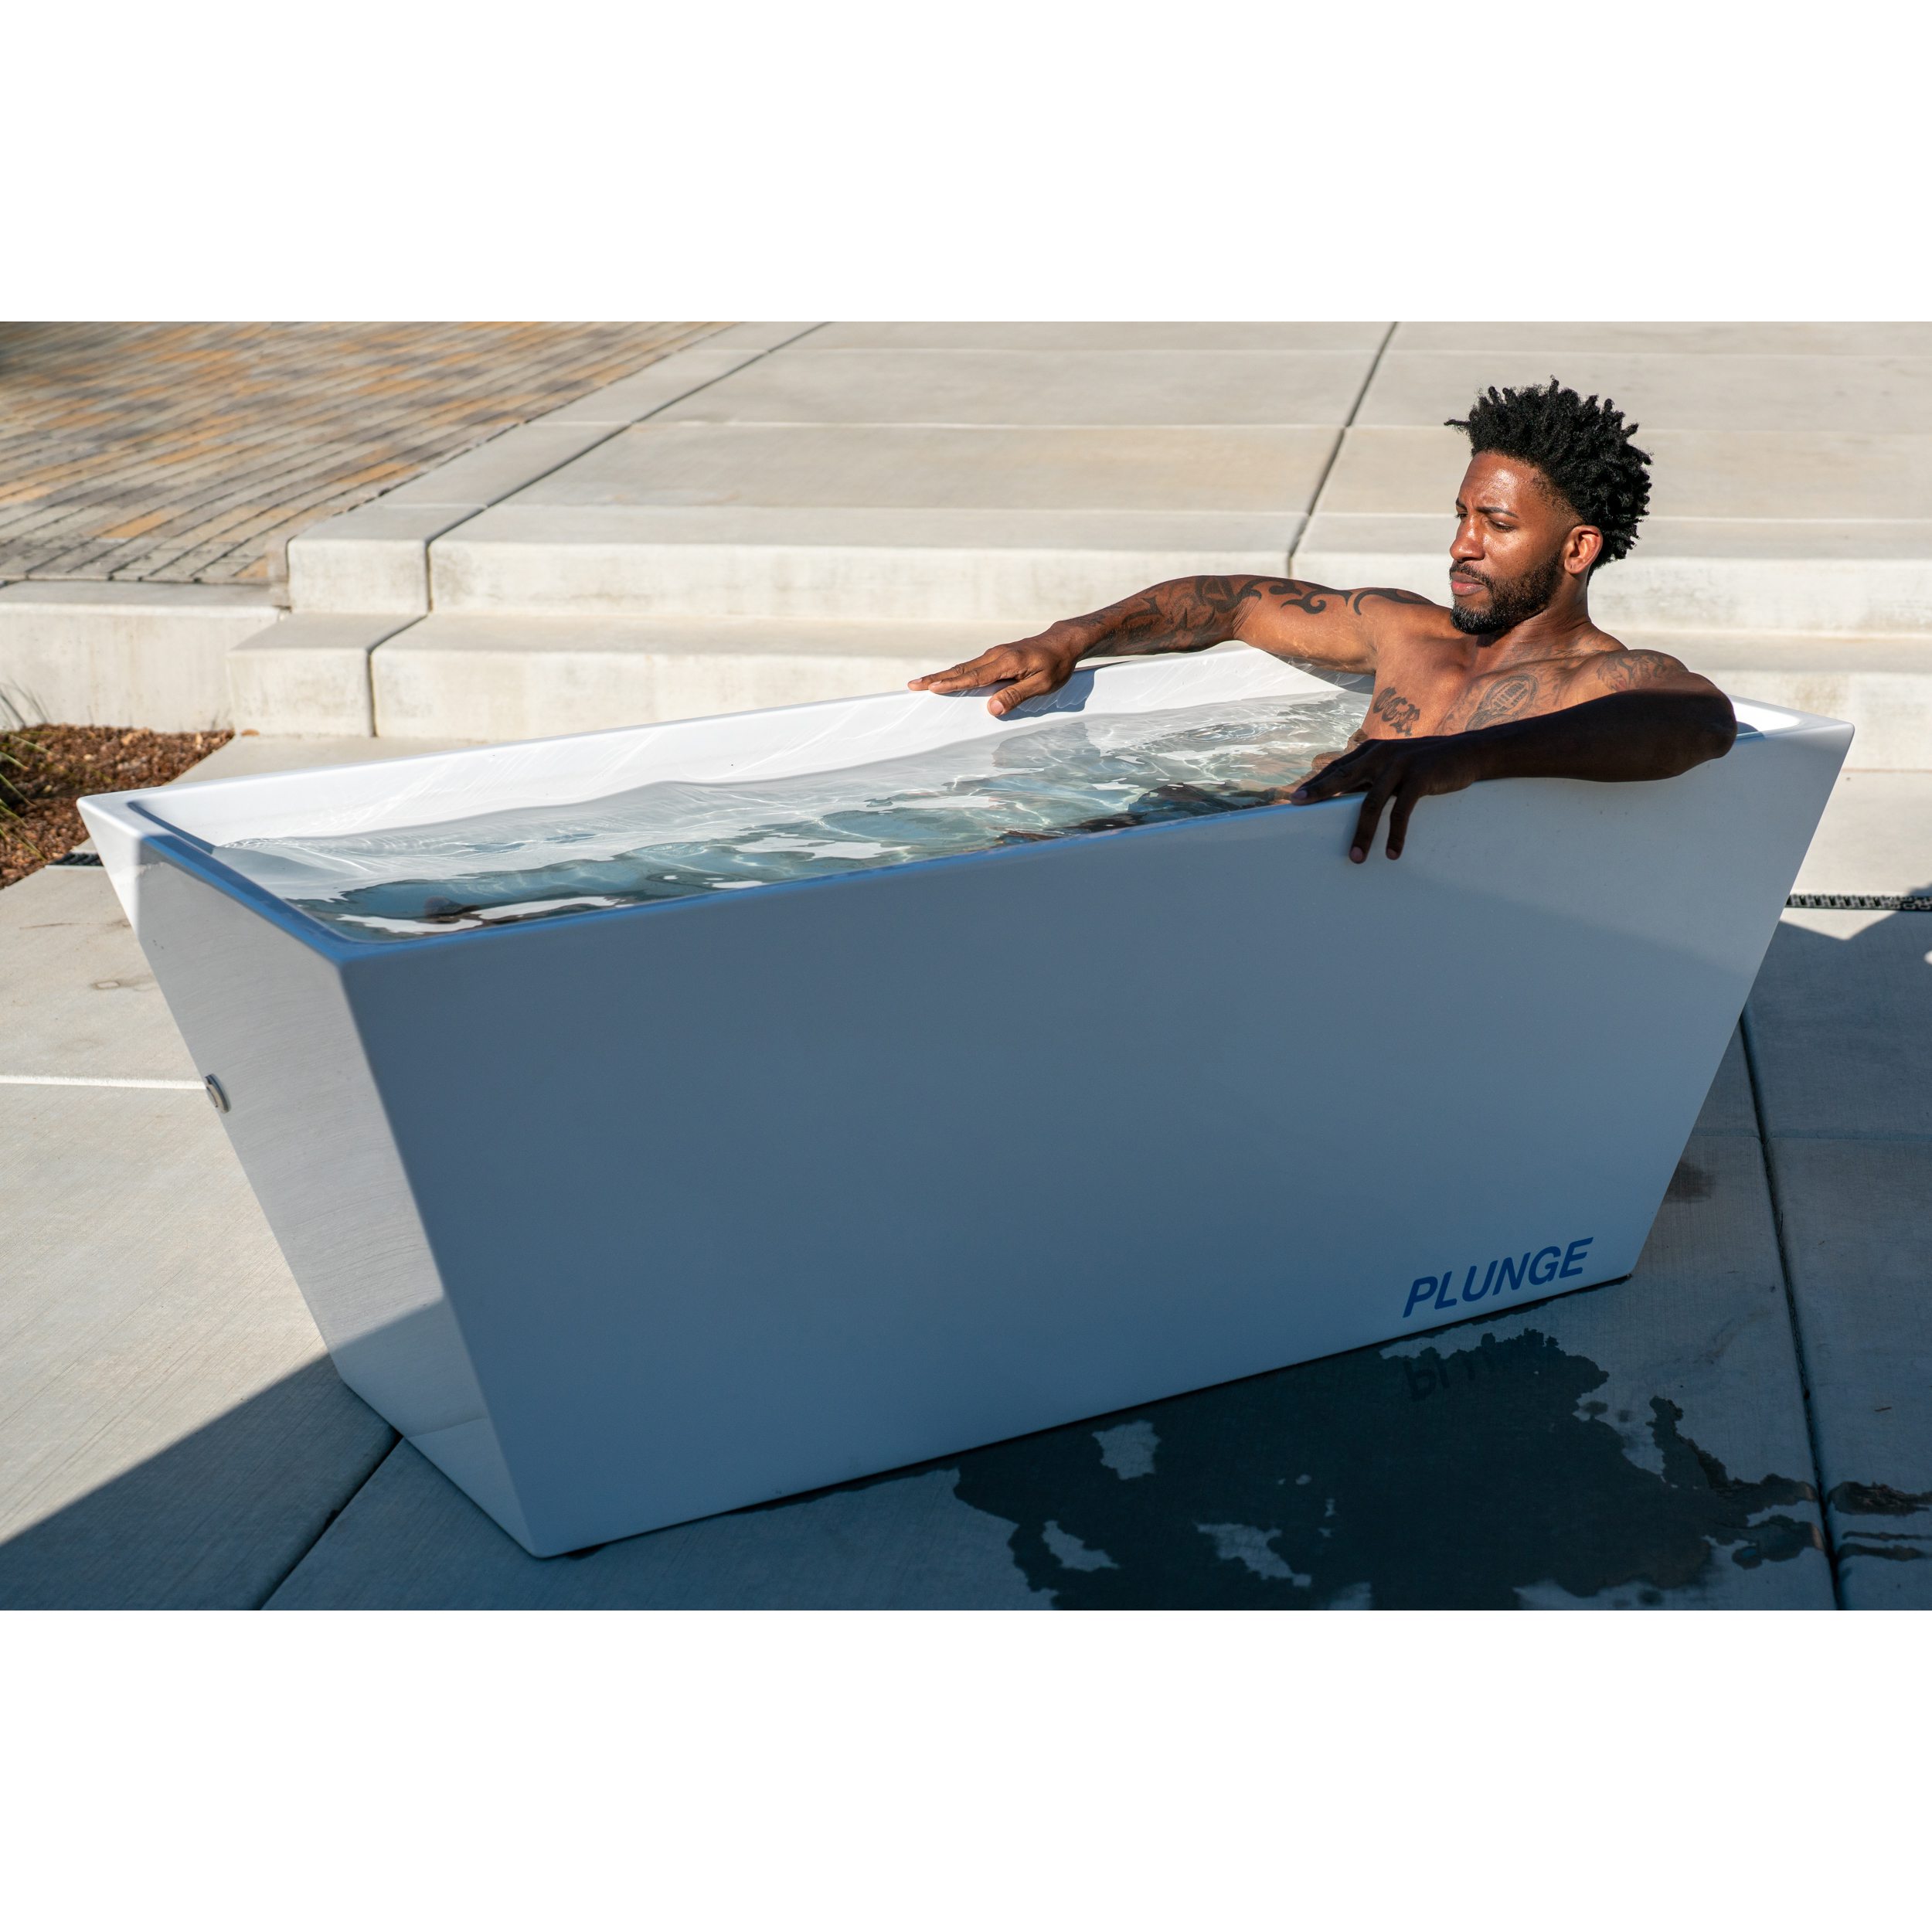 The 8 Best Cold Plunge Tubs for a Quick Refresh